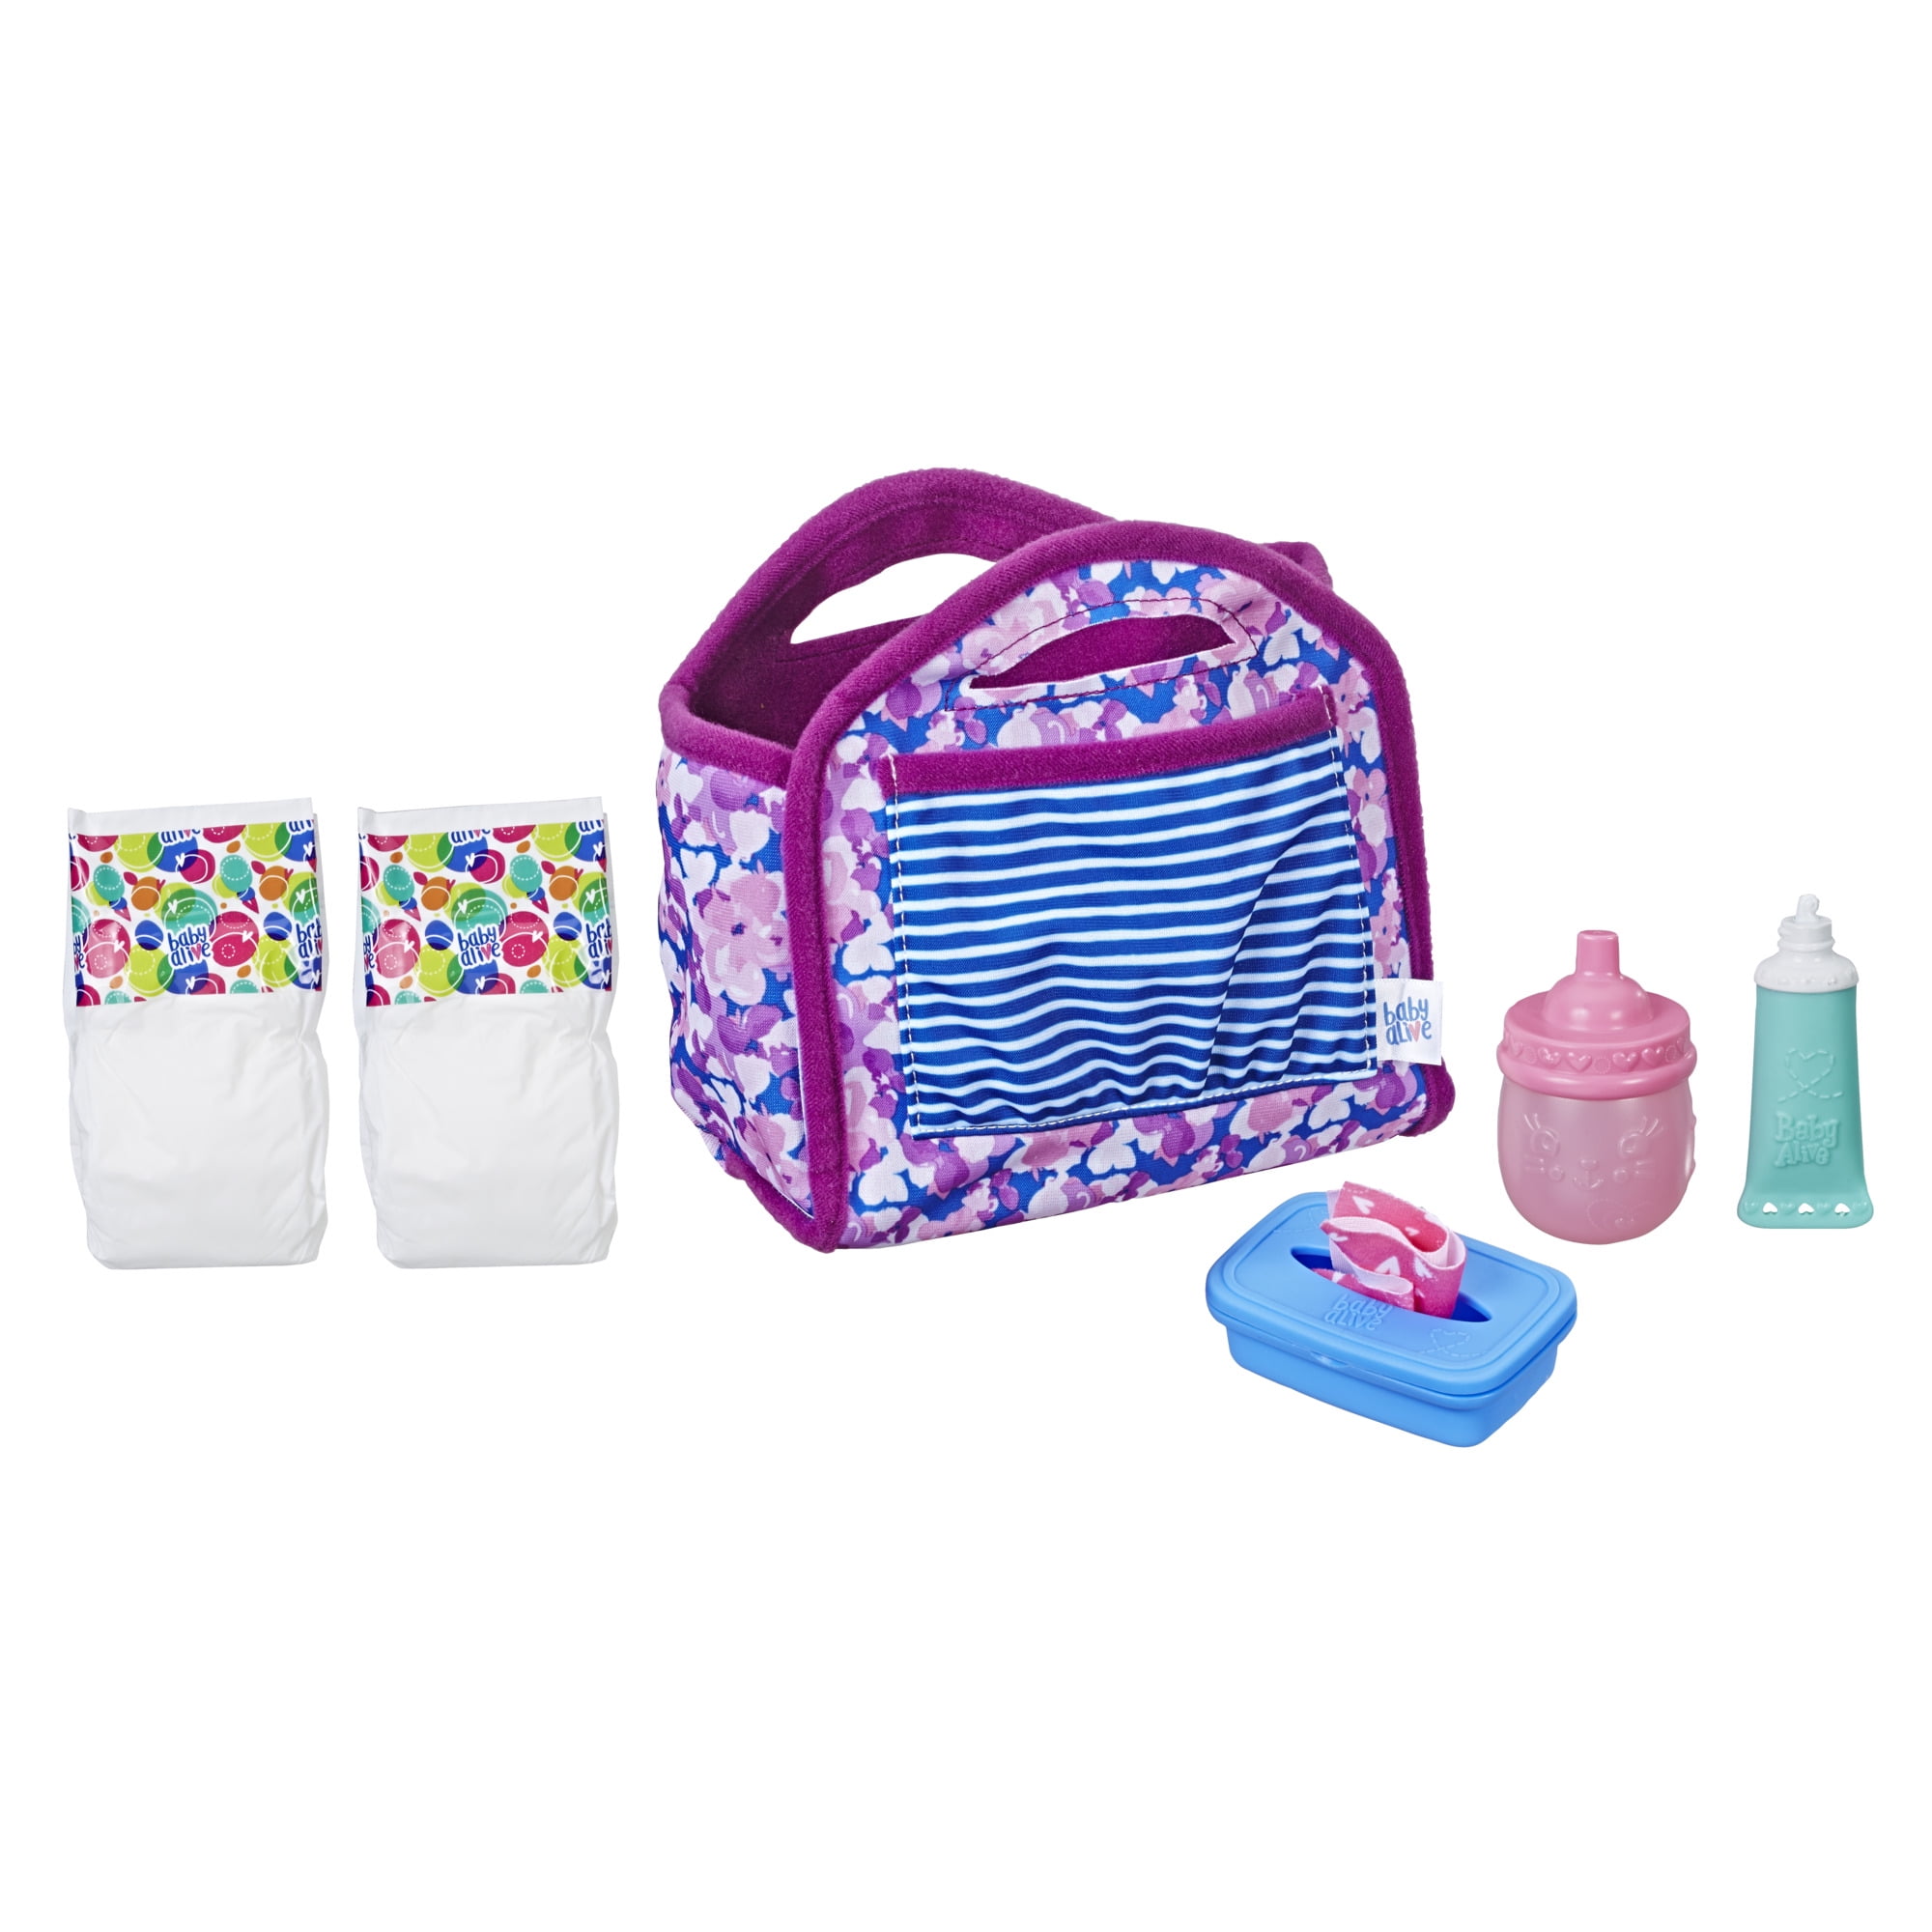 Baby Alive Diaper Bag Set, for Ages 3+ 